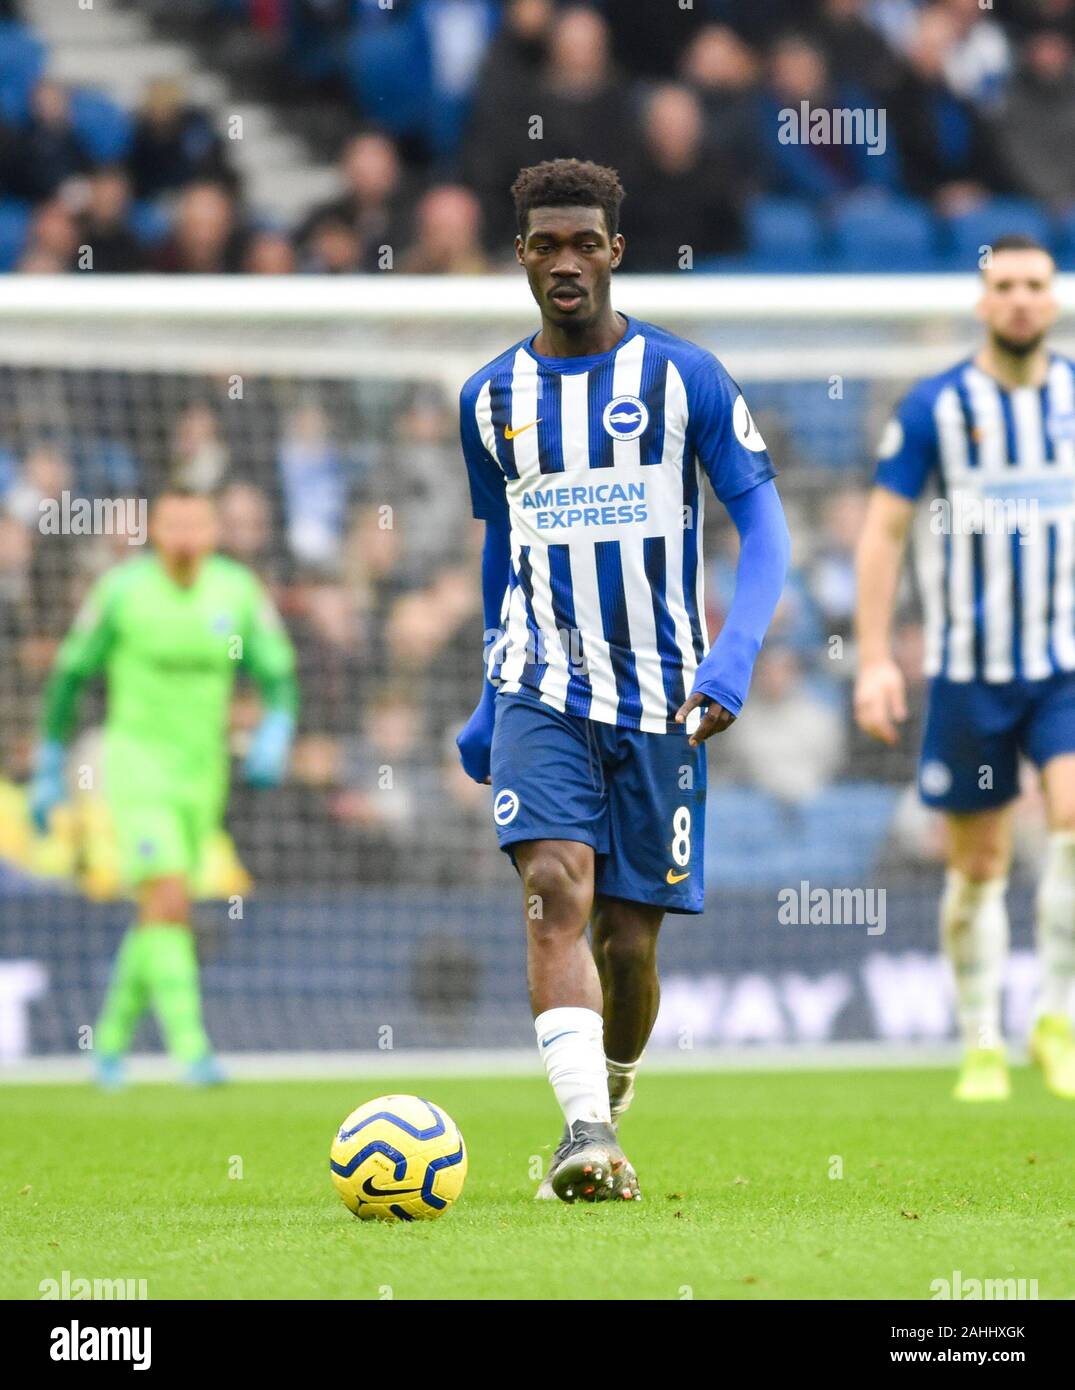 Yves Bissouma of Brighton during the Premier League match between Brighton and Hove Albion and AFC Bournemouth at The Amex Stadium Brighton, UK - 28th December 2019 - Photo Simon Dack/Telephoto Images Editorial use only. No merchandising. For Football images FA and Premier League restrictions apply inc. no internet/mobile usage without FAPL license - for details contact Football Dataco Stock Photo